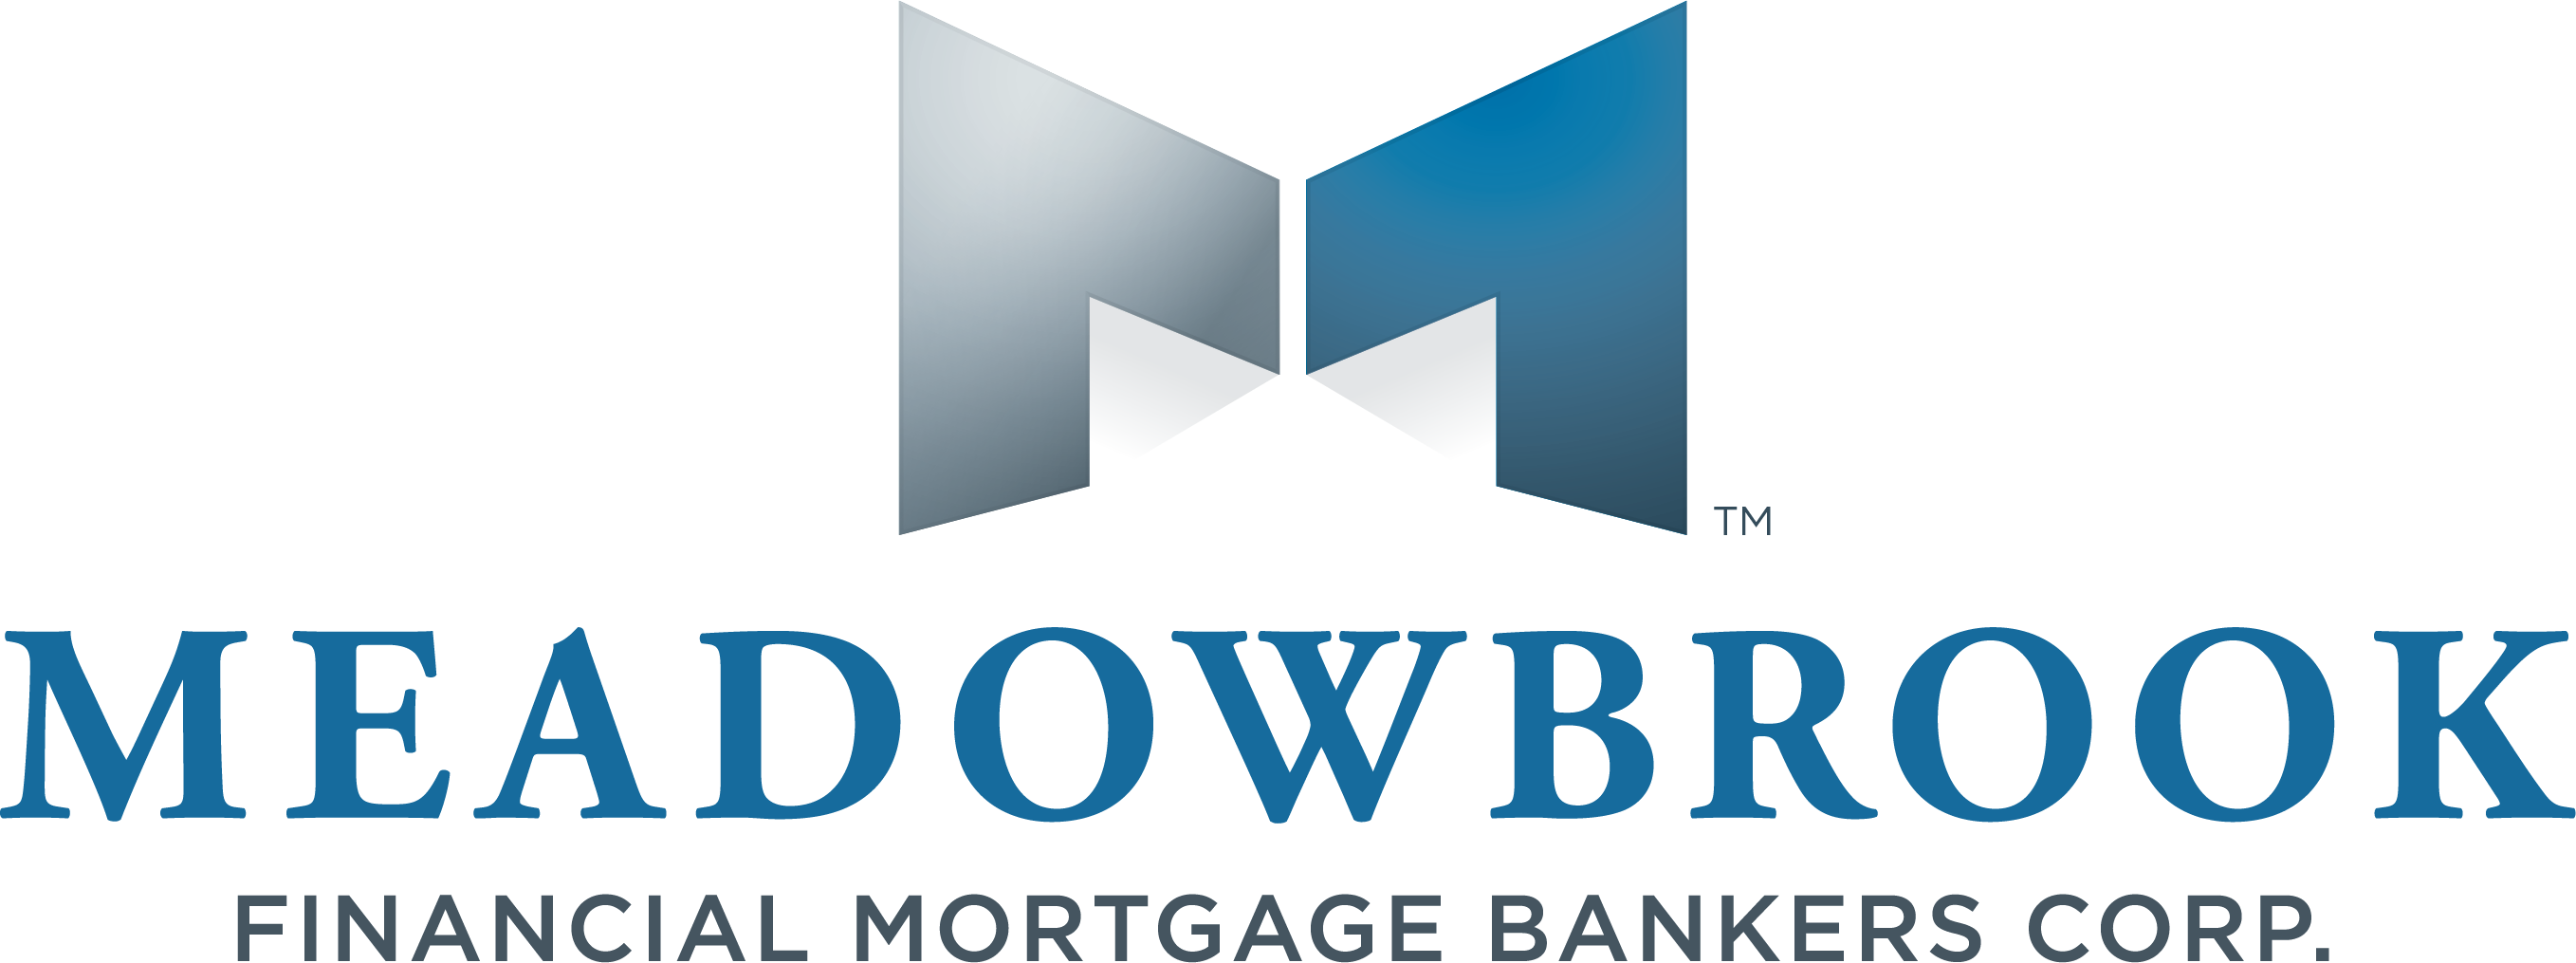 Meadowbrook Financial Mortgage Bankers Corp. logo